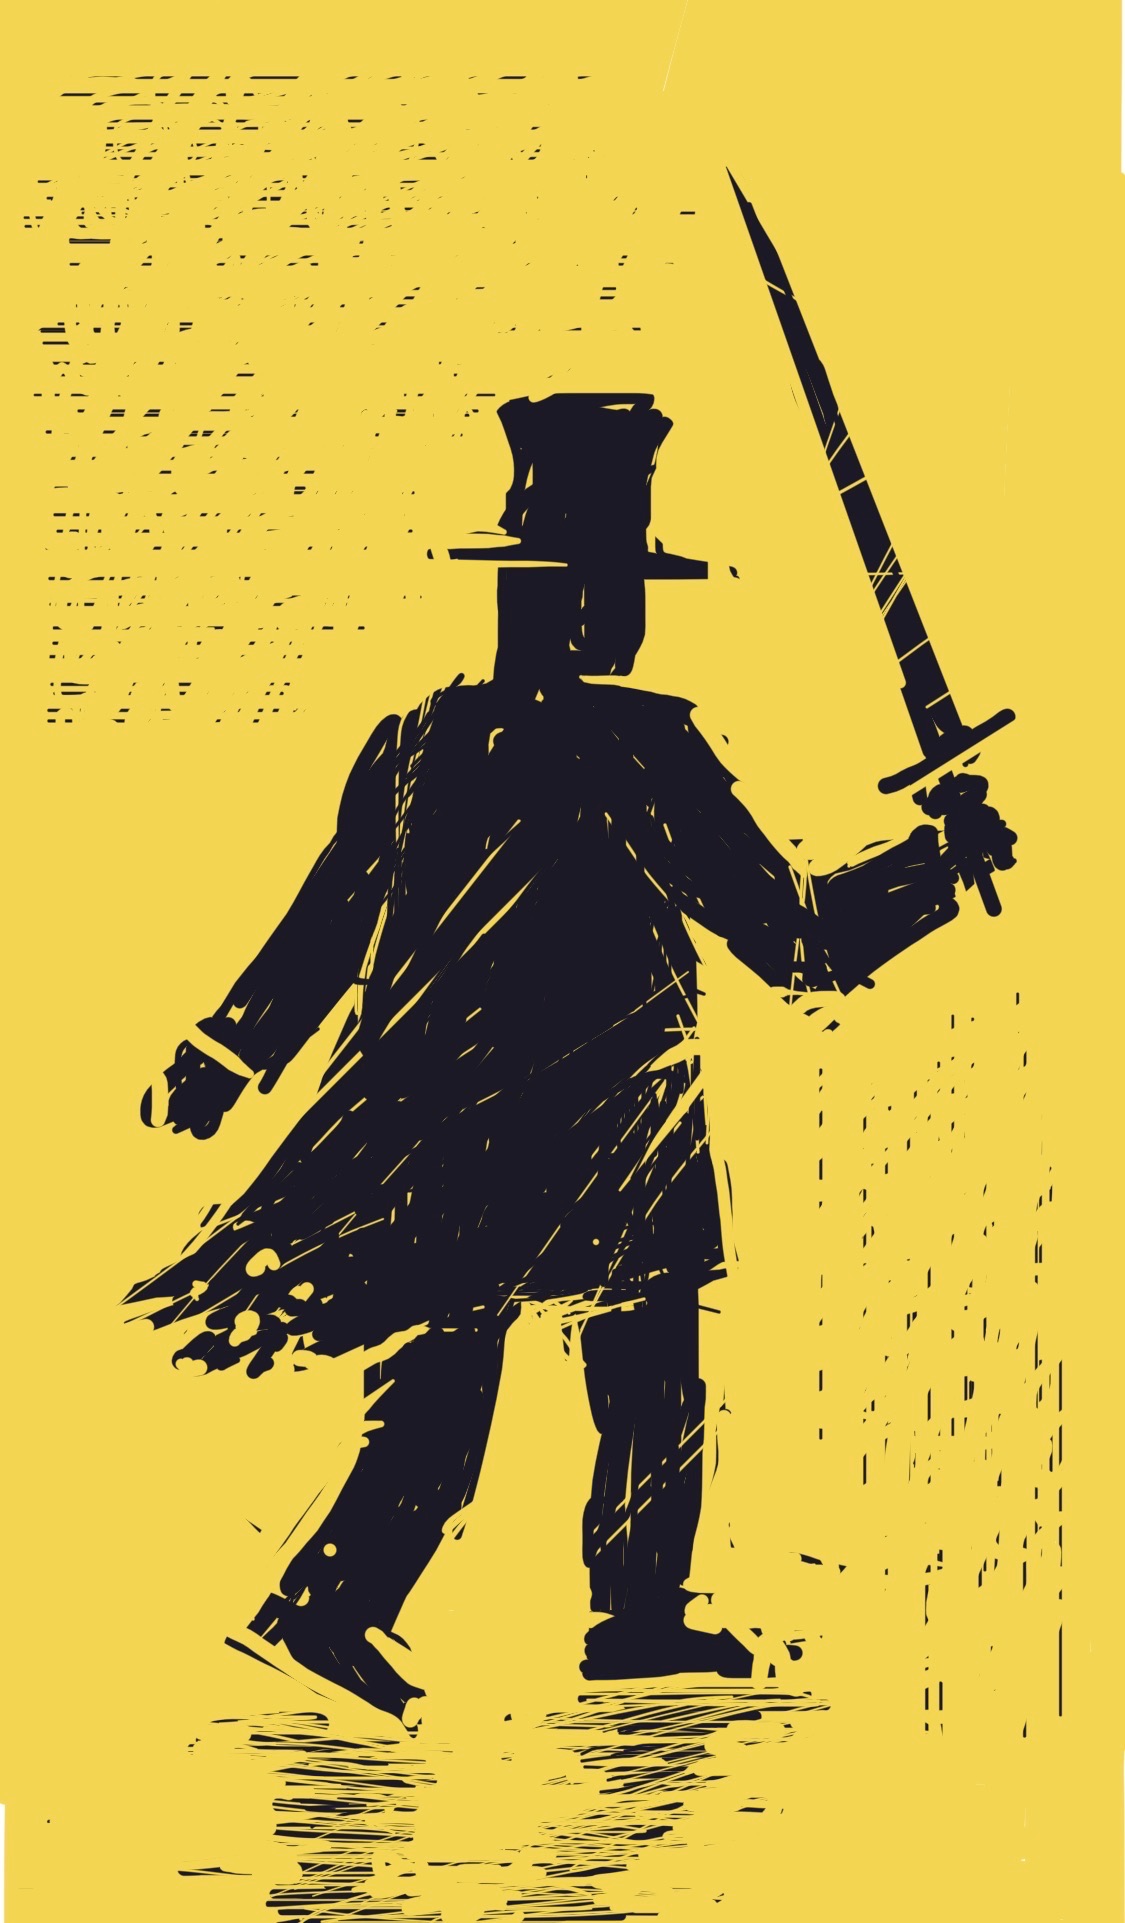 A man with a tattered coat, a top hat, and a drawn sword